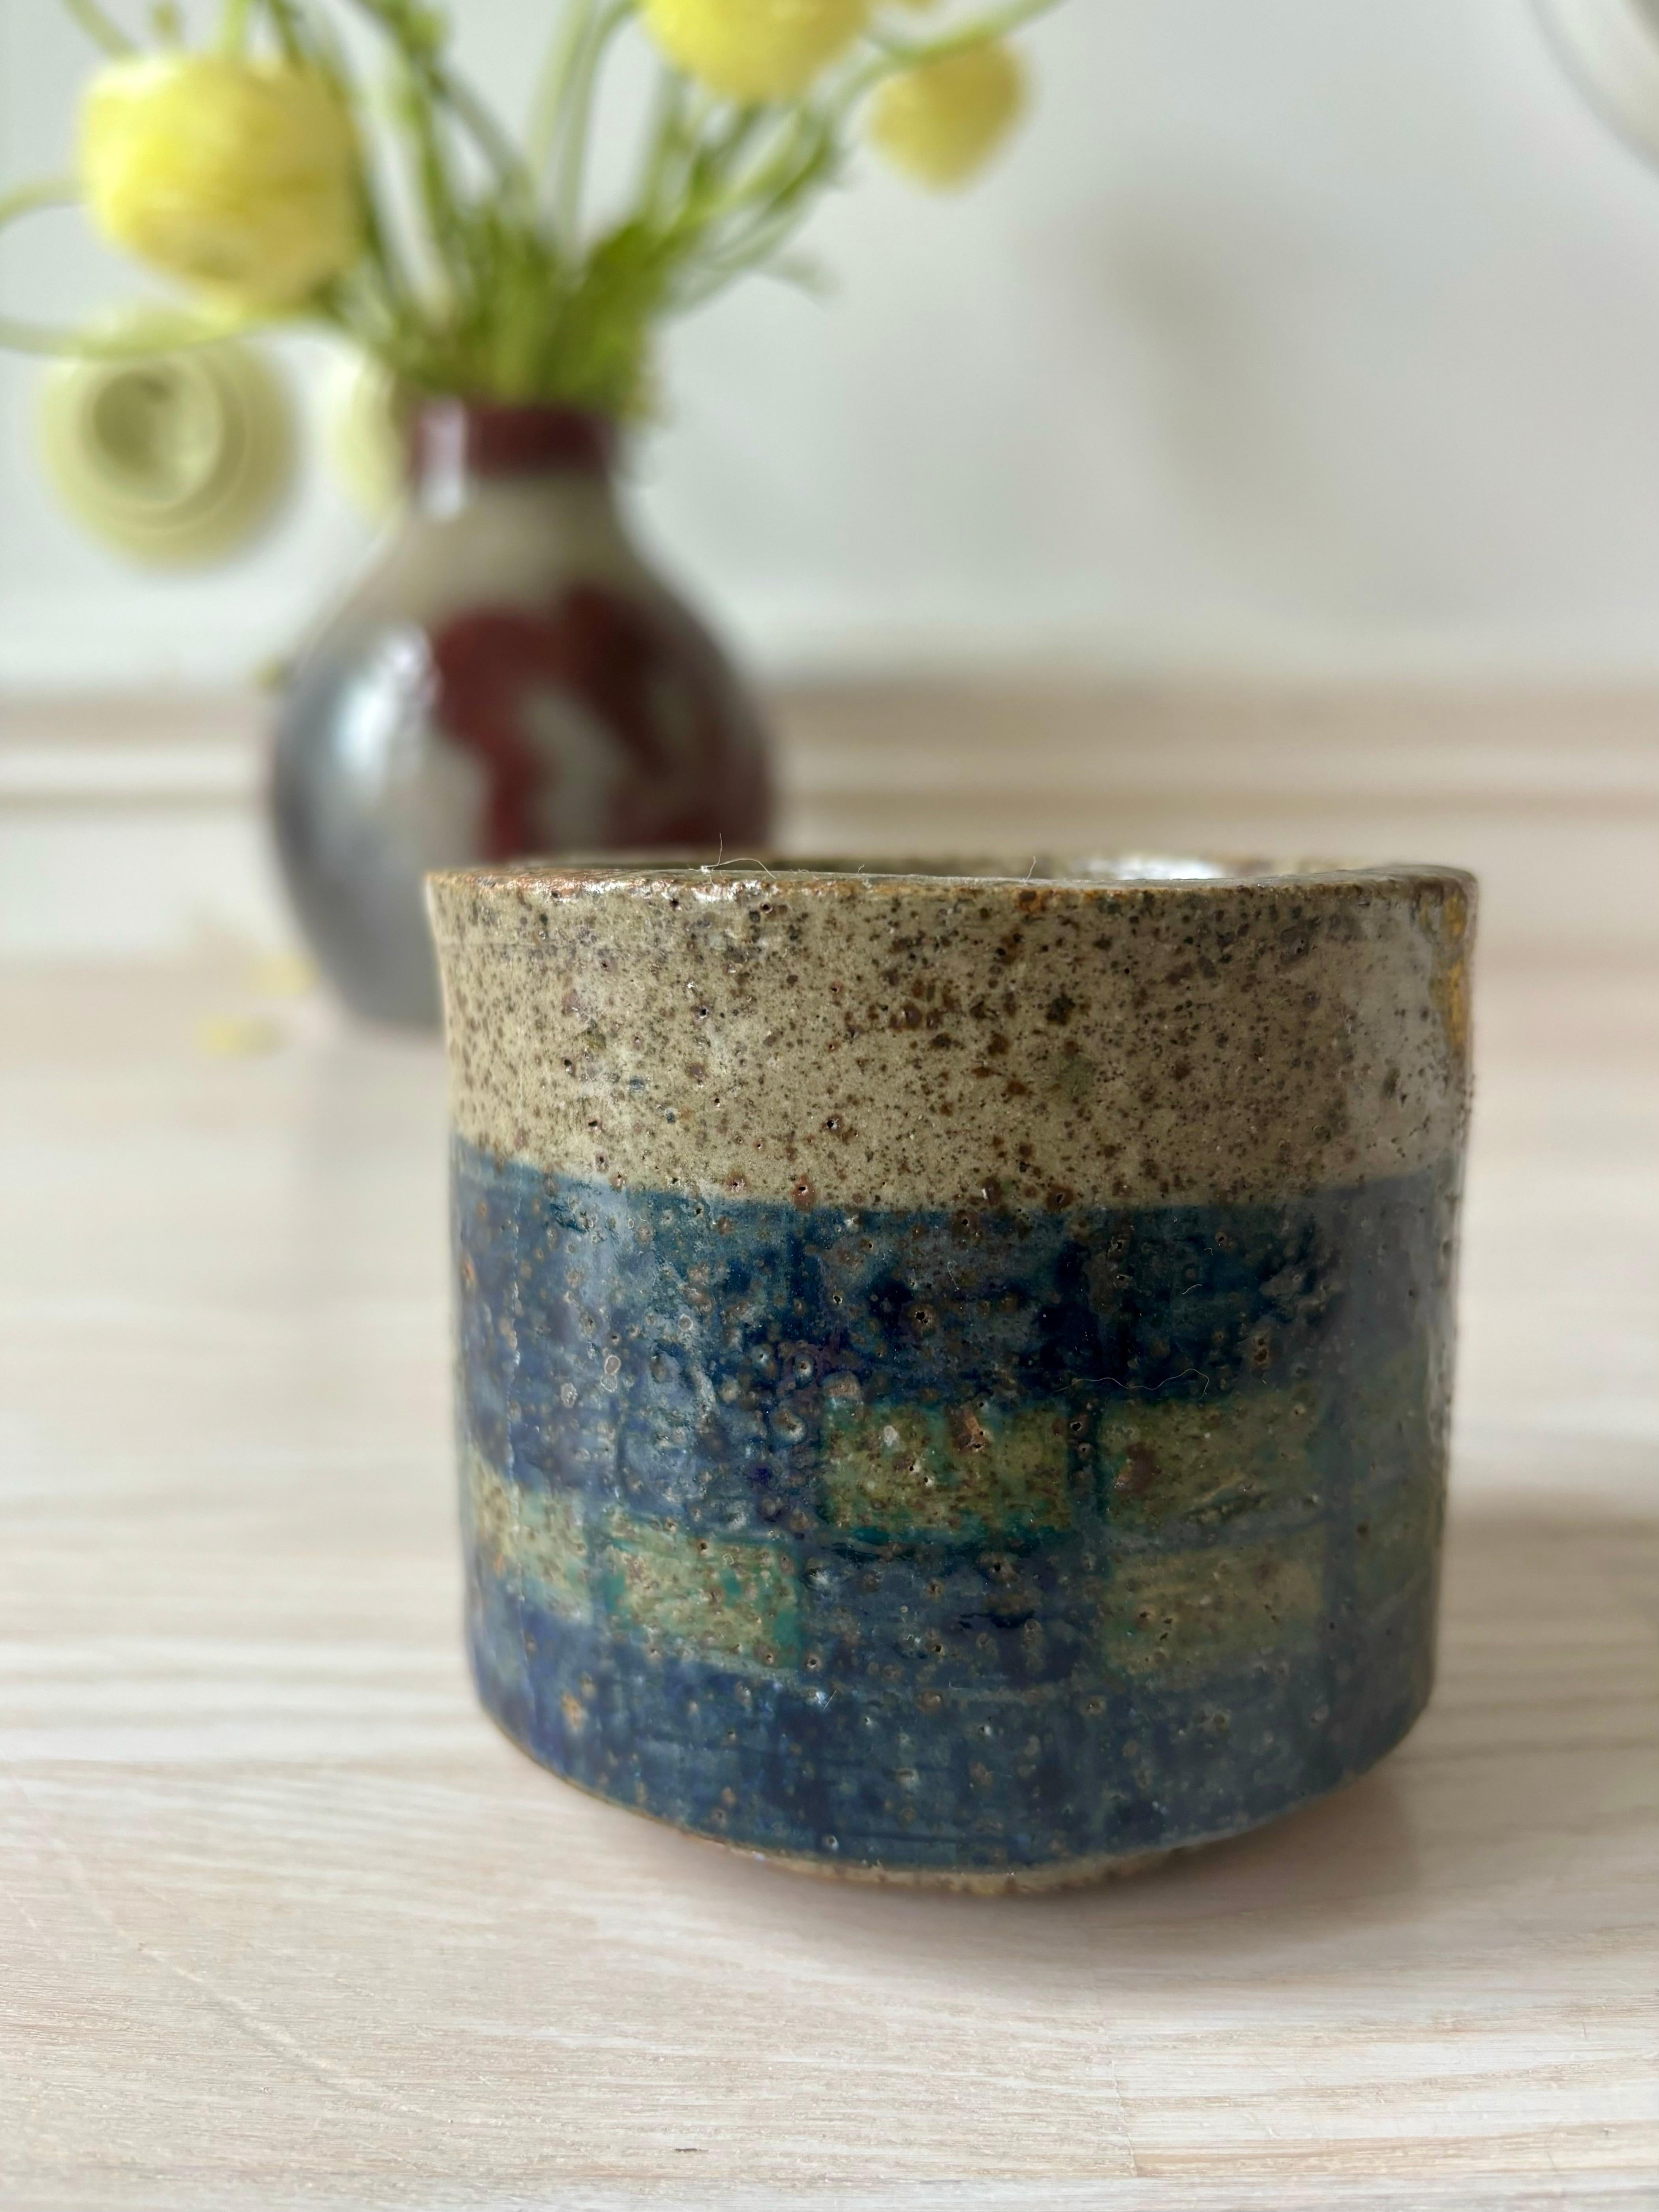 Handmade Spanish modern round planter vase with speckled glaze and blue, green squares with crackles. Thick ceramic walls on small foot. Signature and original label under base. Beautiful vintage condition. 
Spain, circa 1970s